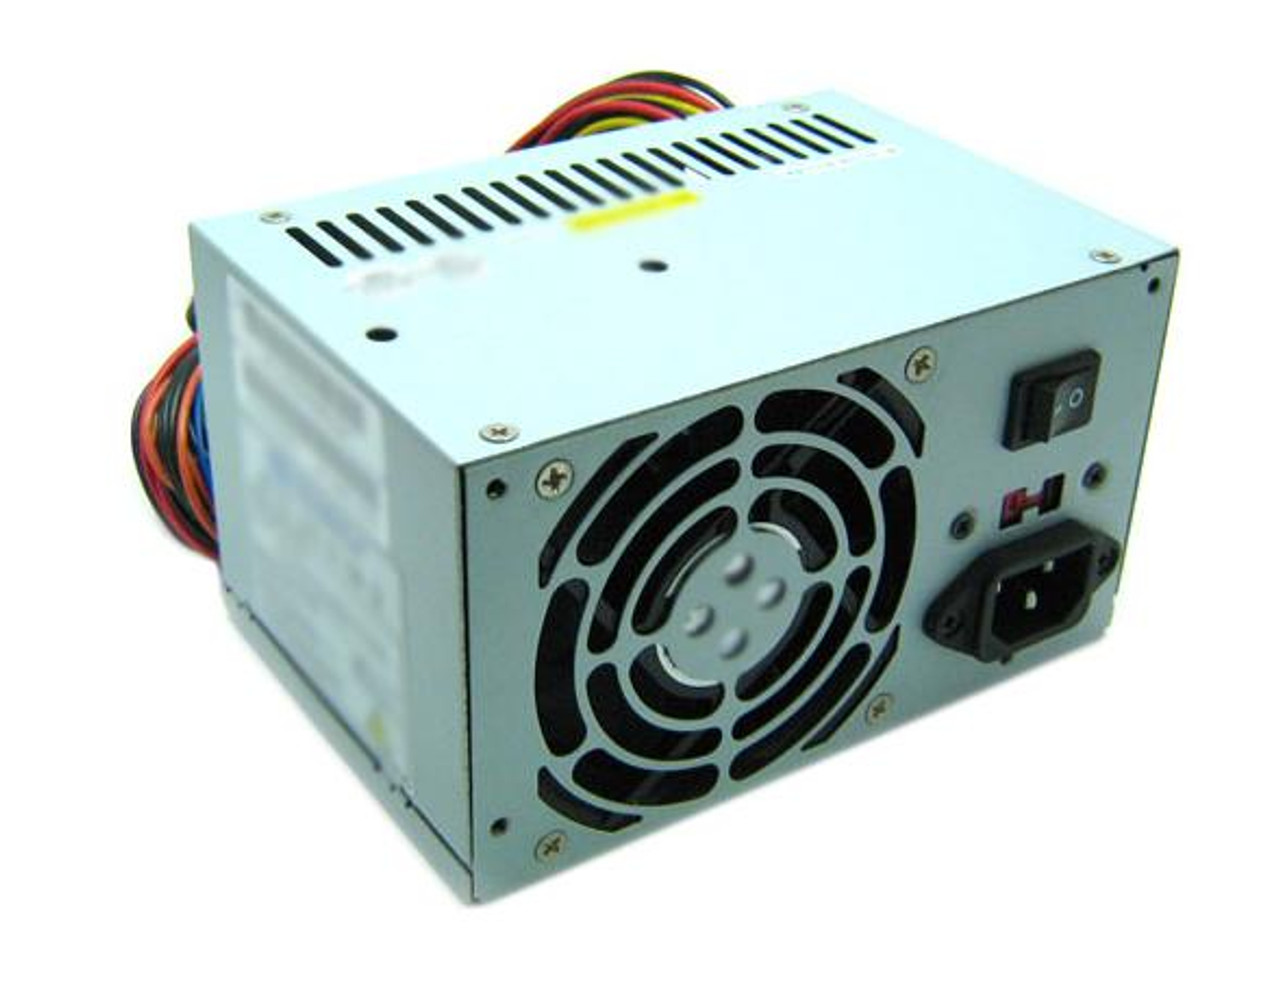 FSP400-60EGA Sparkle Power 400-Watts ATX12V 2.3 Switching 80Plus Gold Power Supply with Active PFC